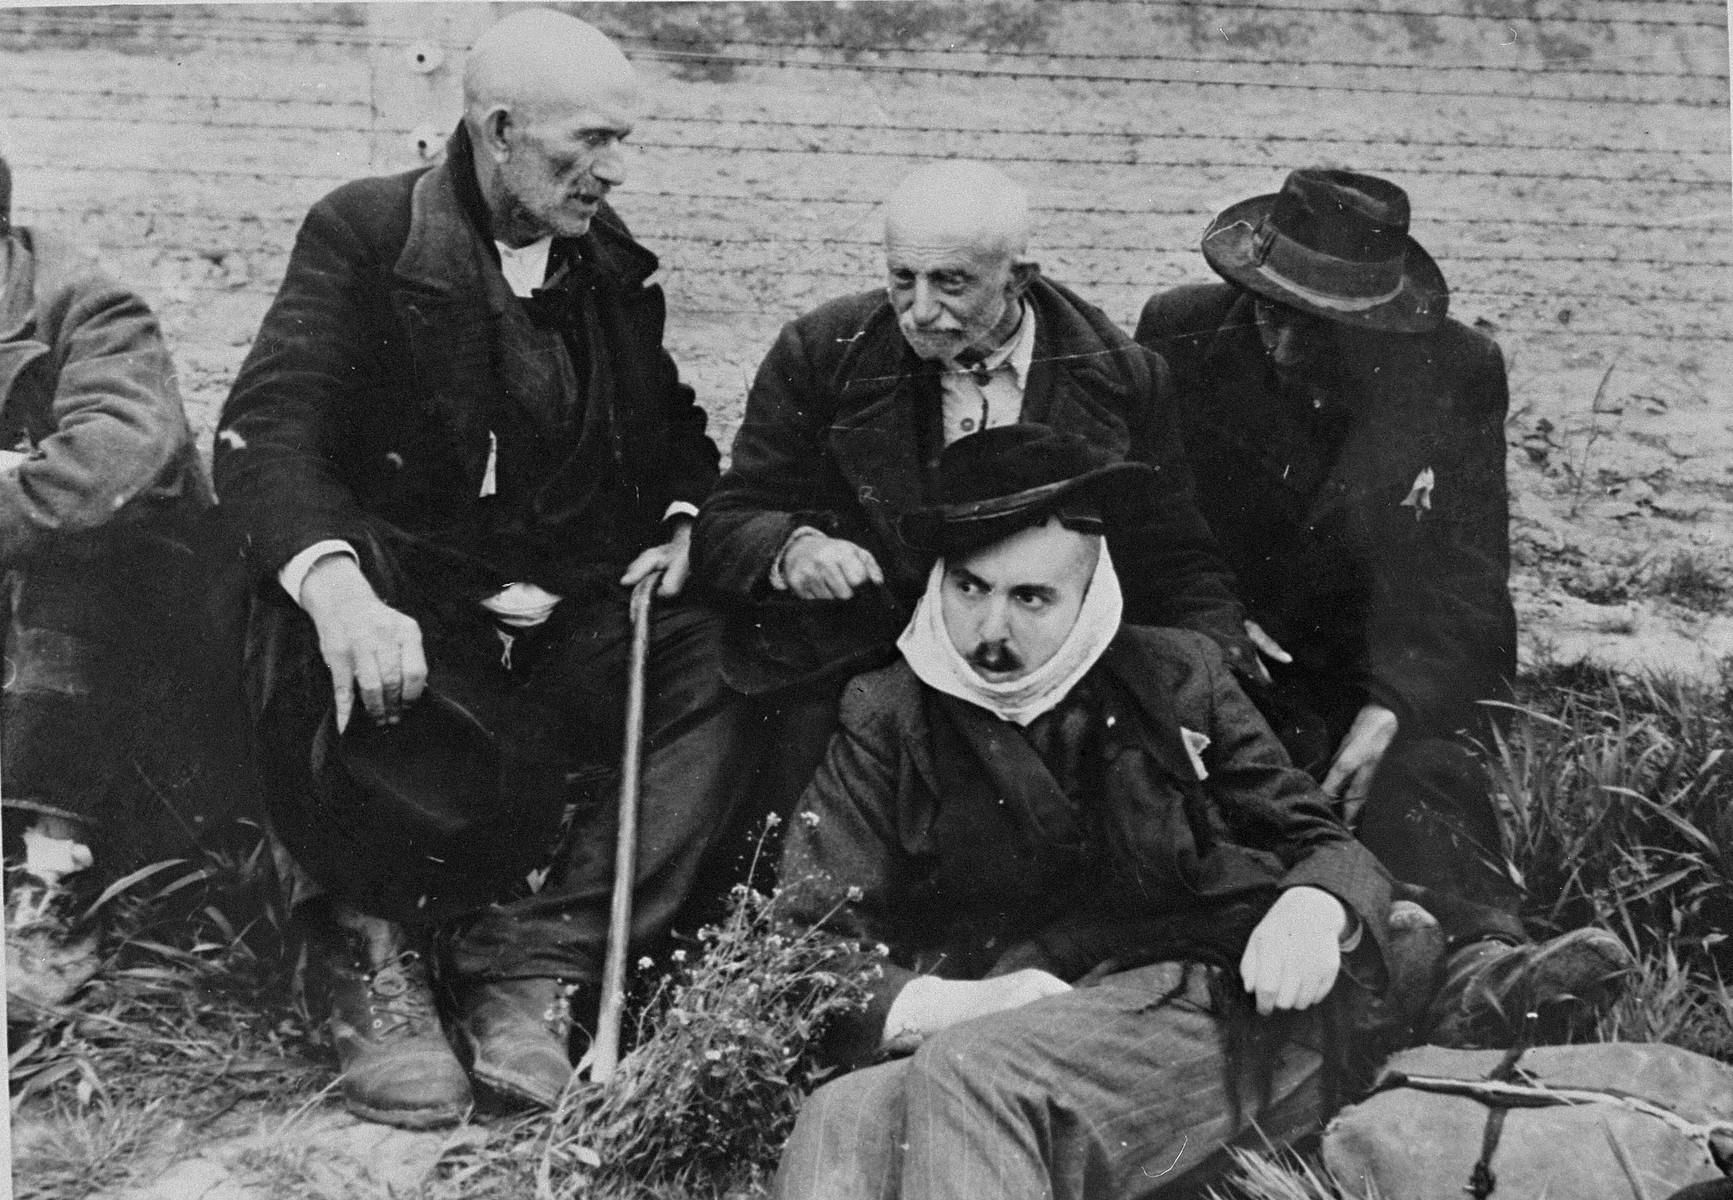 Elderly Jewish men from Subcarpathian Rus sit on the grass in Auschwitz-Birkenau prior to being sent to the gas chambers.

One of the men wears a scarf to cover his shaven face.